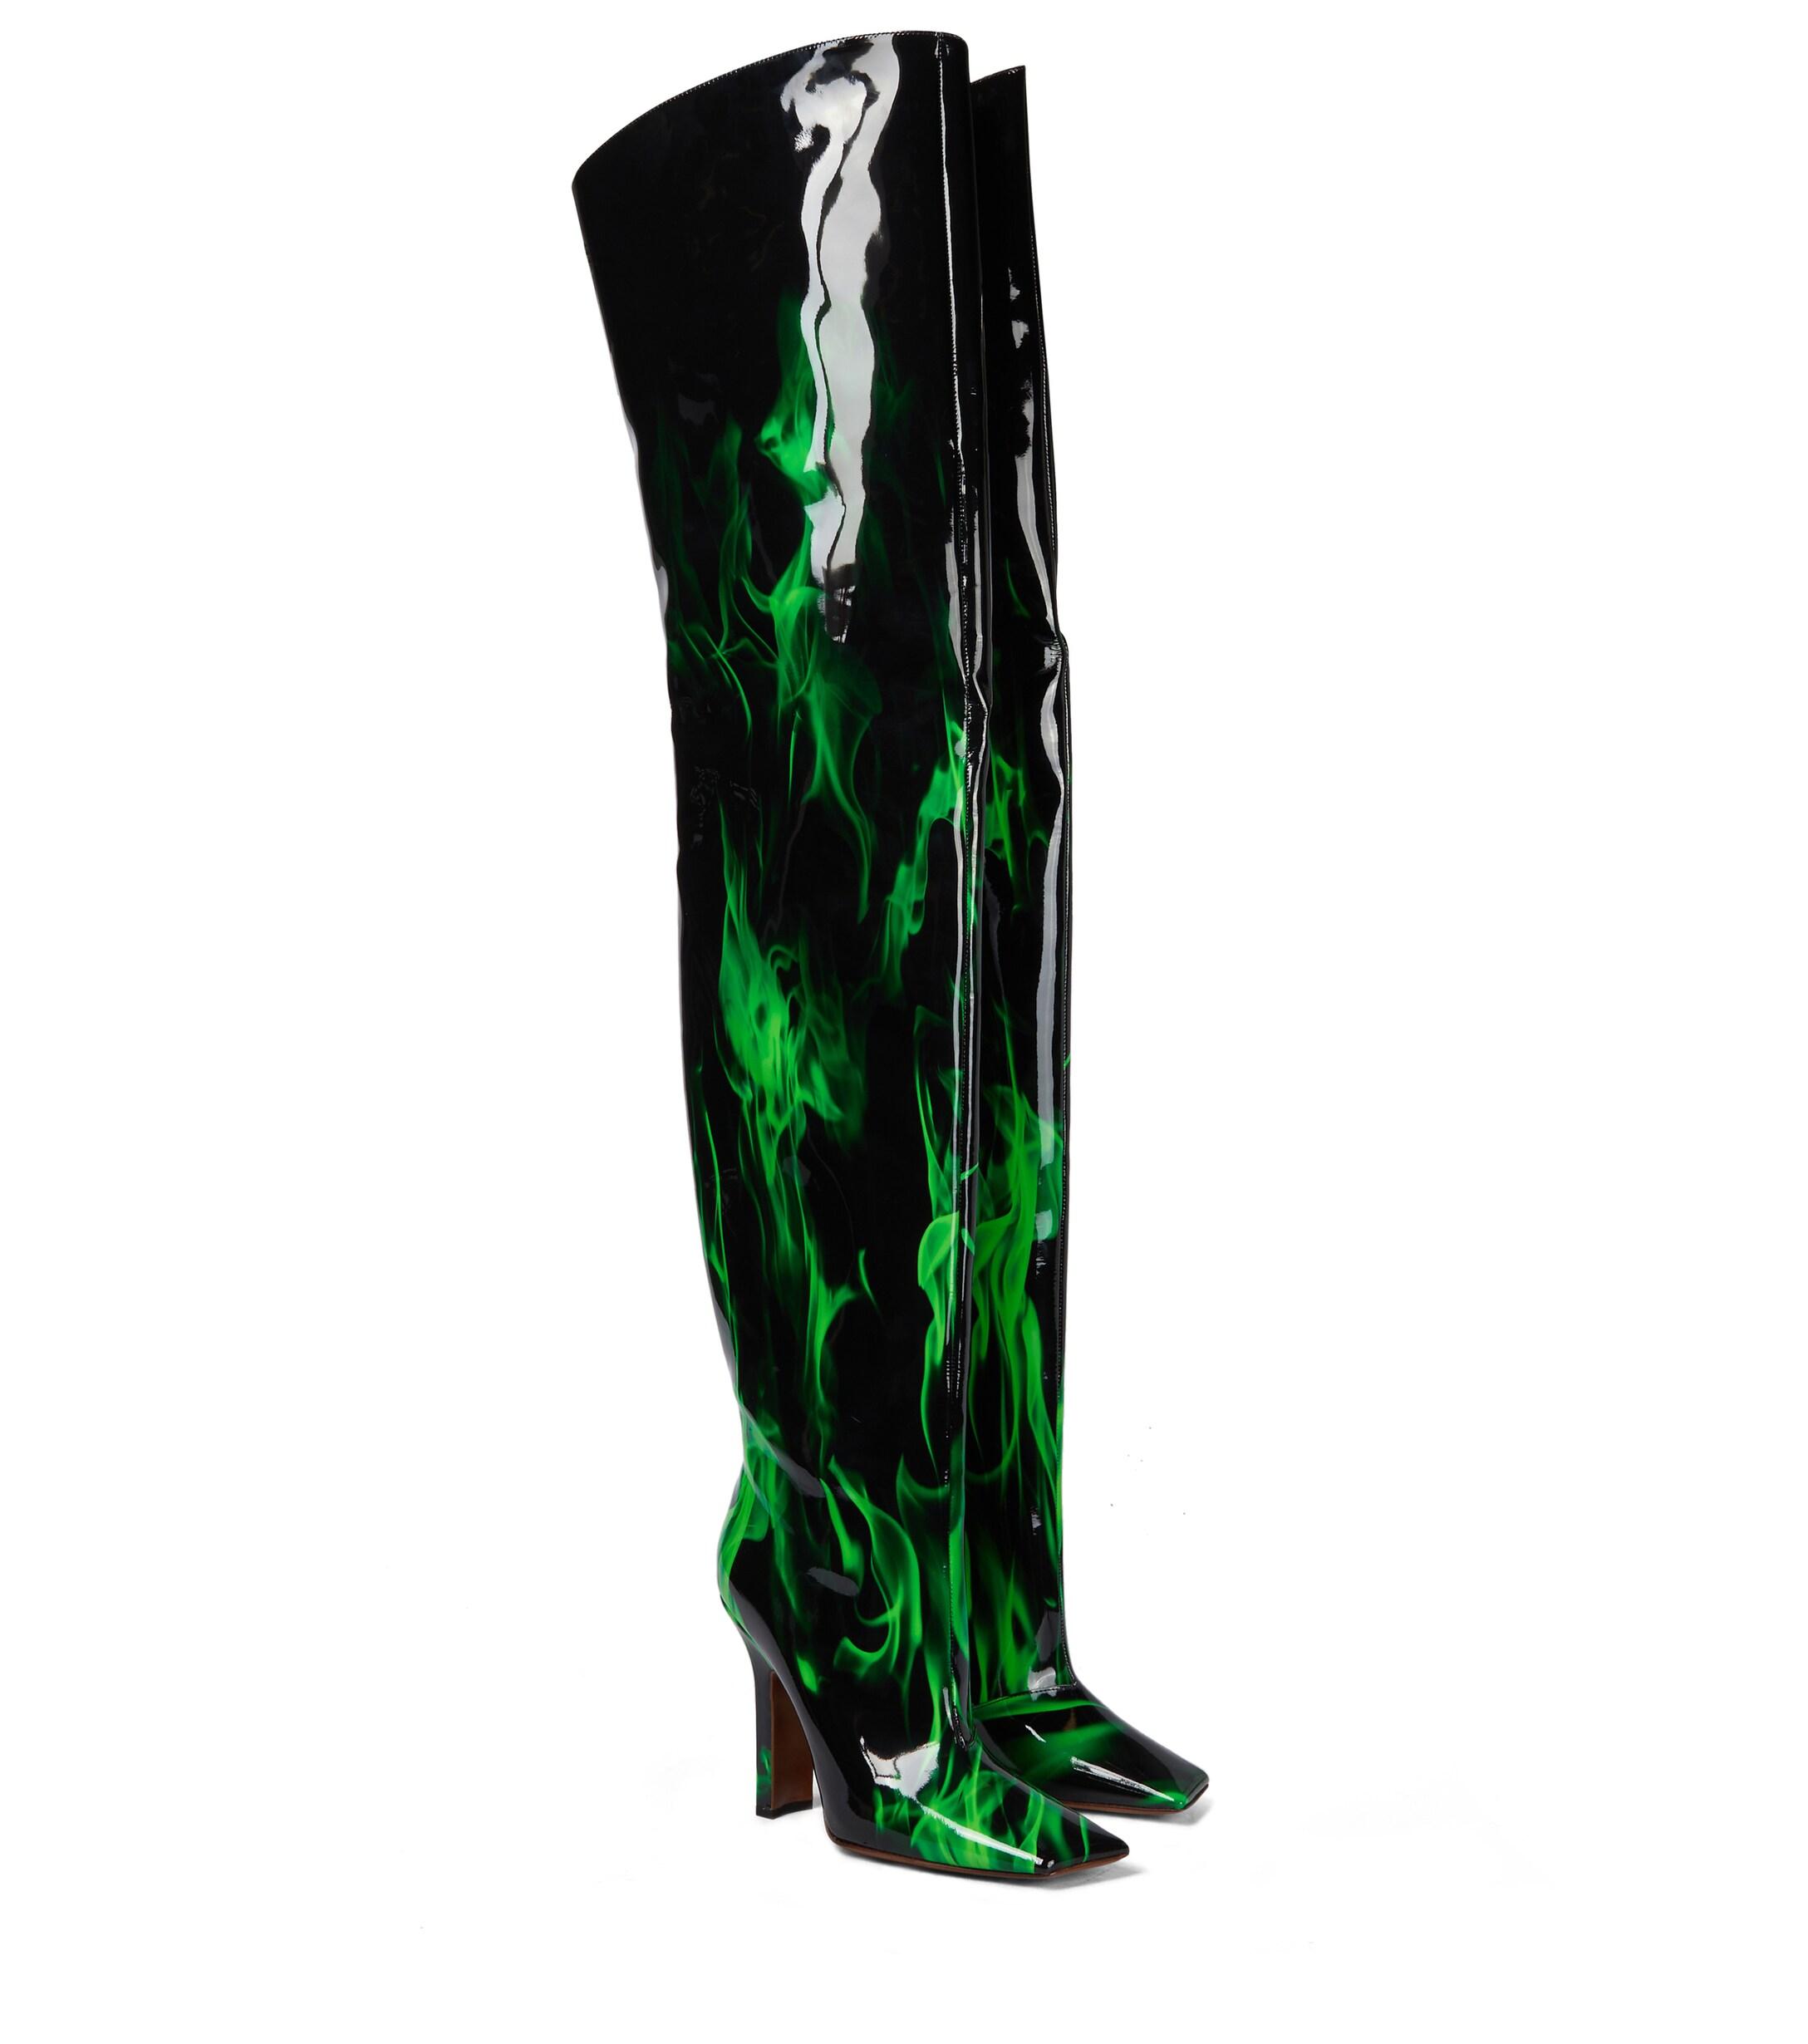 Vetements Boomerang Patent Leather Over-the-knee Boots in Green | Lyst